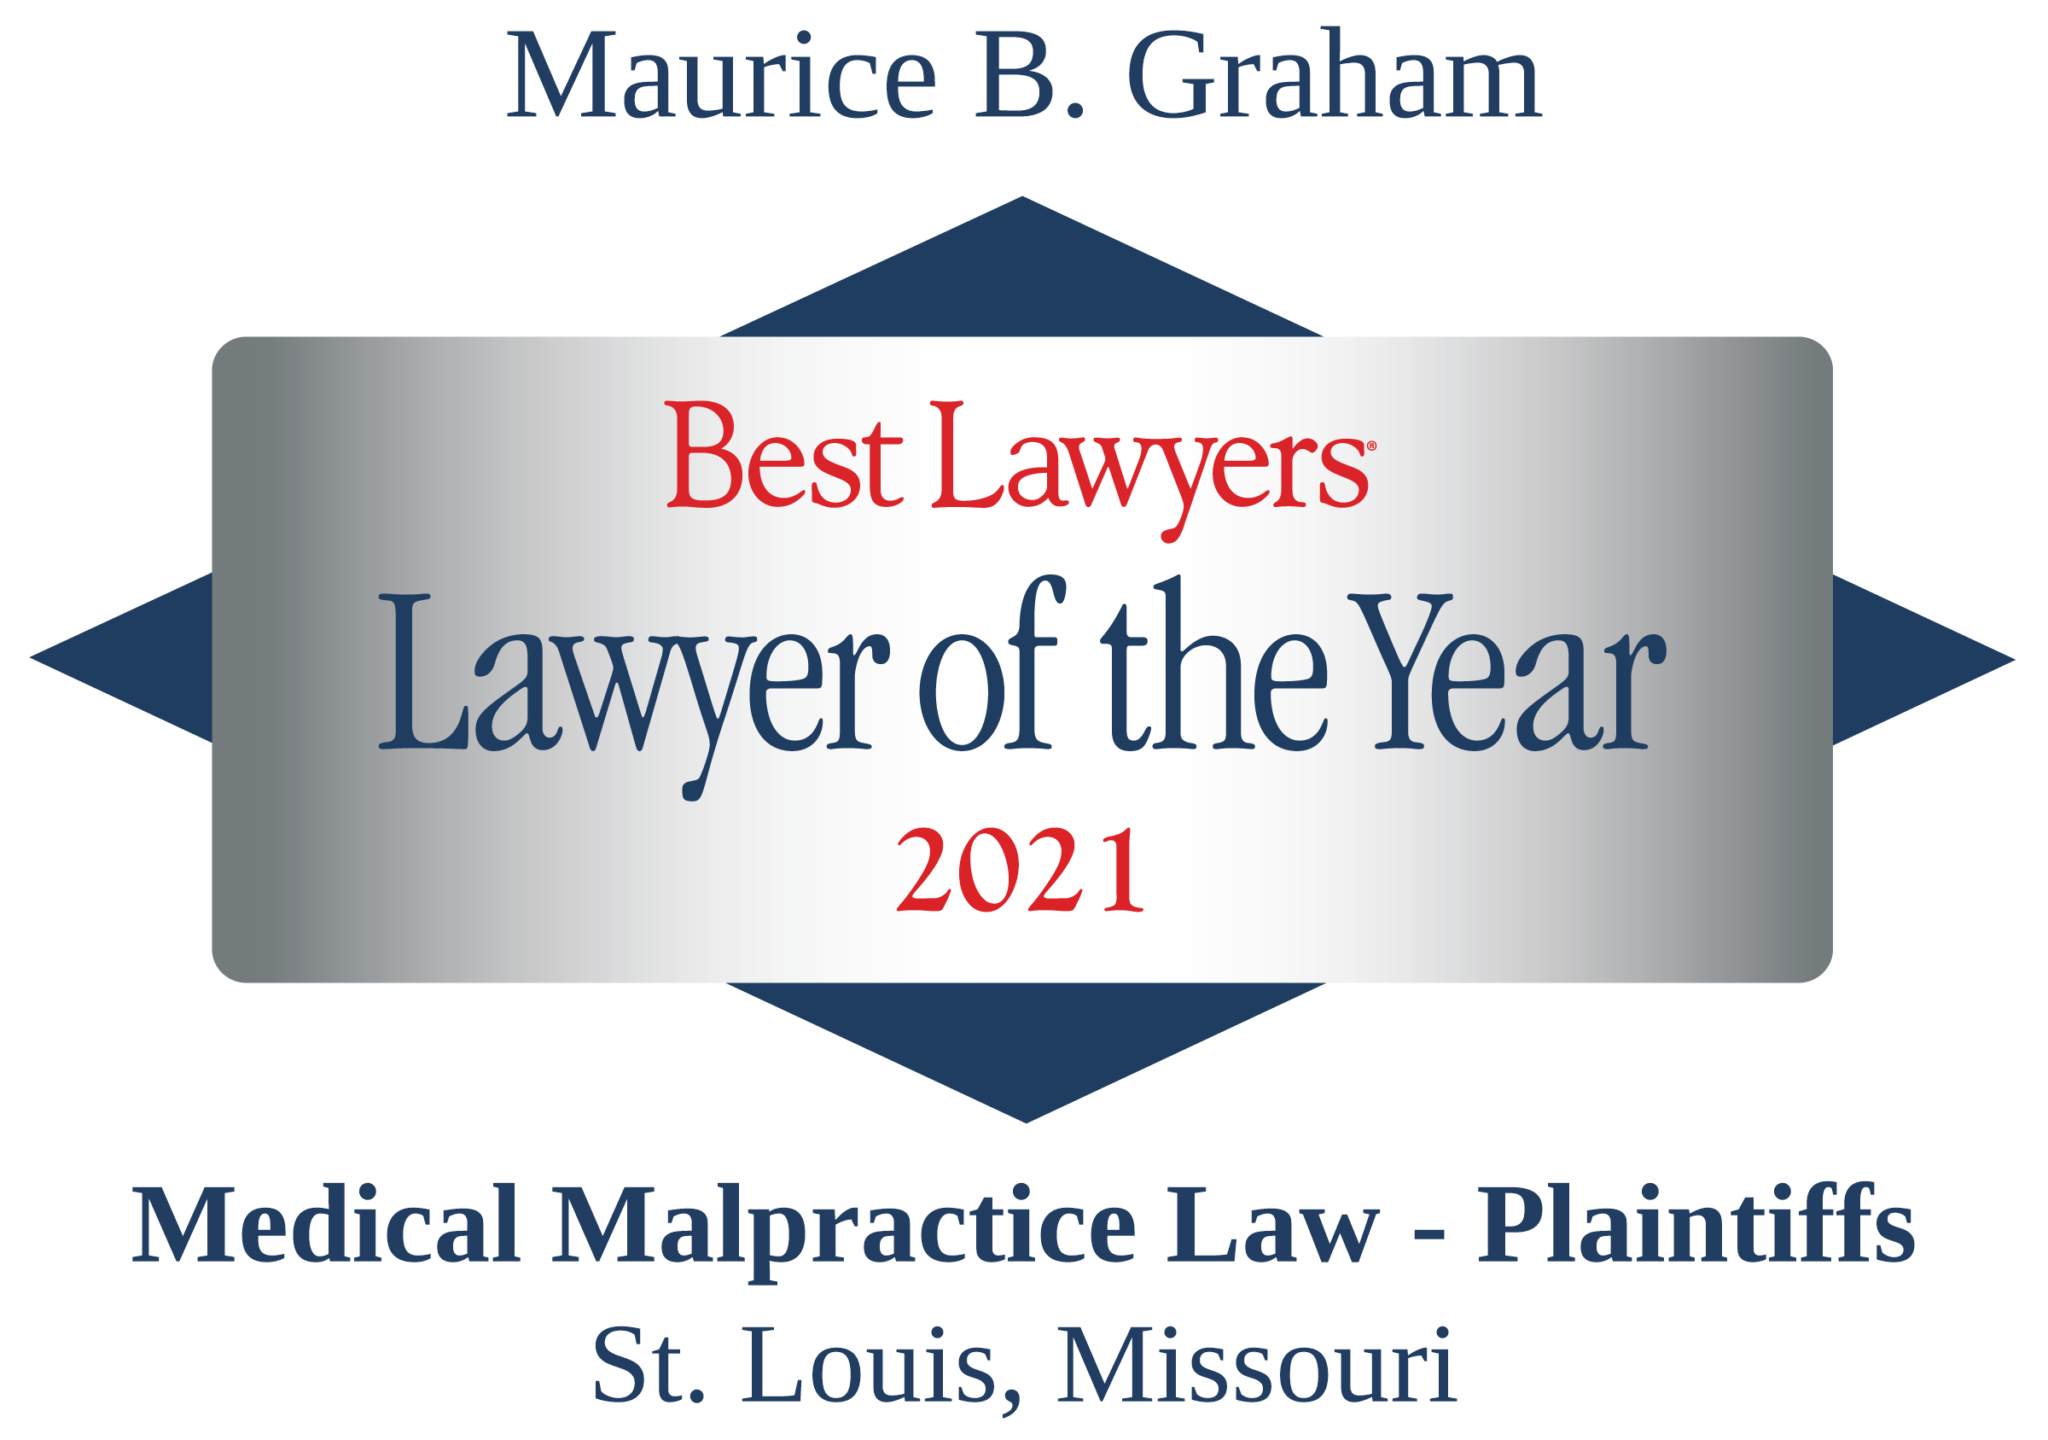 Maurice Graham Lawyer of the Year 2021 badge